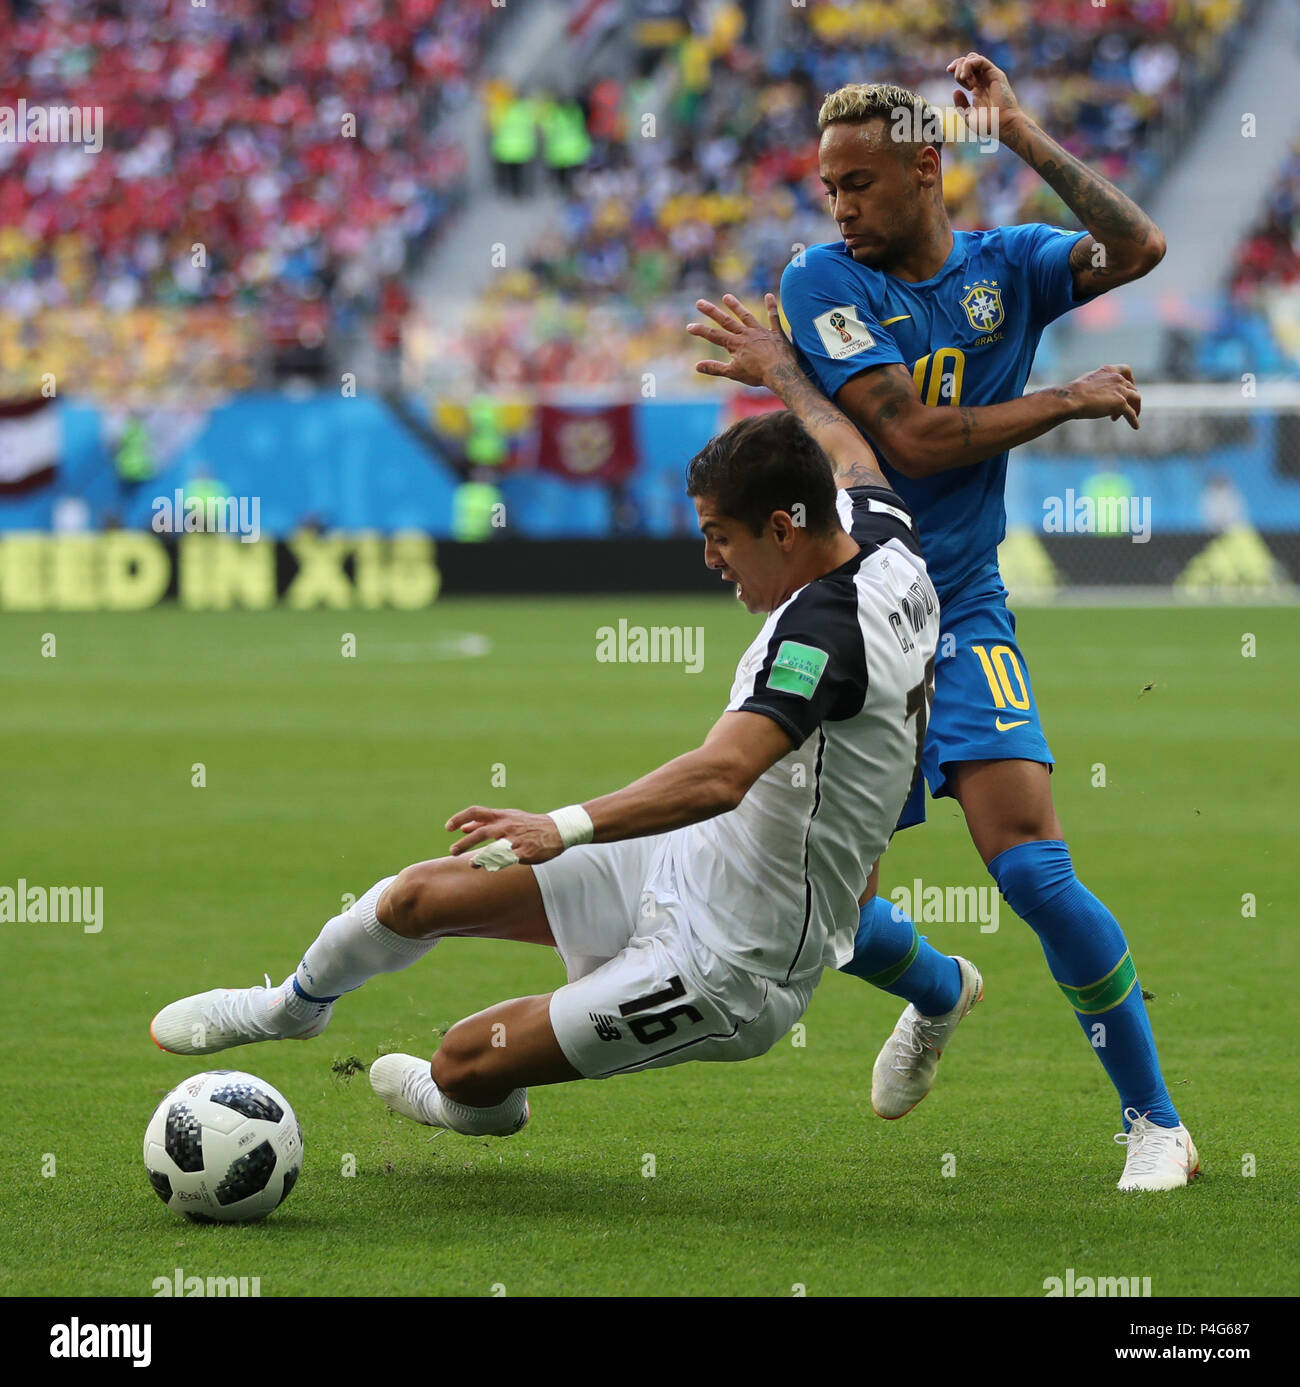 Saint Petersburg, Russia. 22nd June, 2018. Neymar (R) of Brazil vies with Cristian Gamboa of Costa Rica during the 2018 FIFA World Cup Group E match between Brazil and Costa Rica in Saint Petersburg, Russia, June 22, 2018. Credit: Cao Can/Xinhua/Alamy Live News Stock Photo